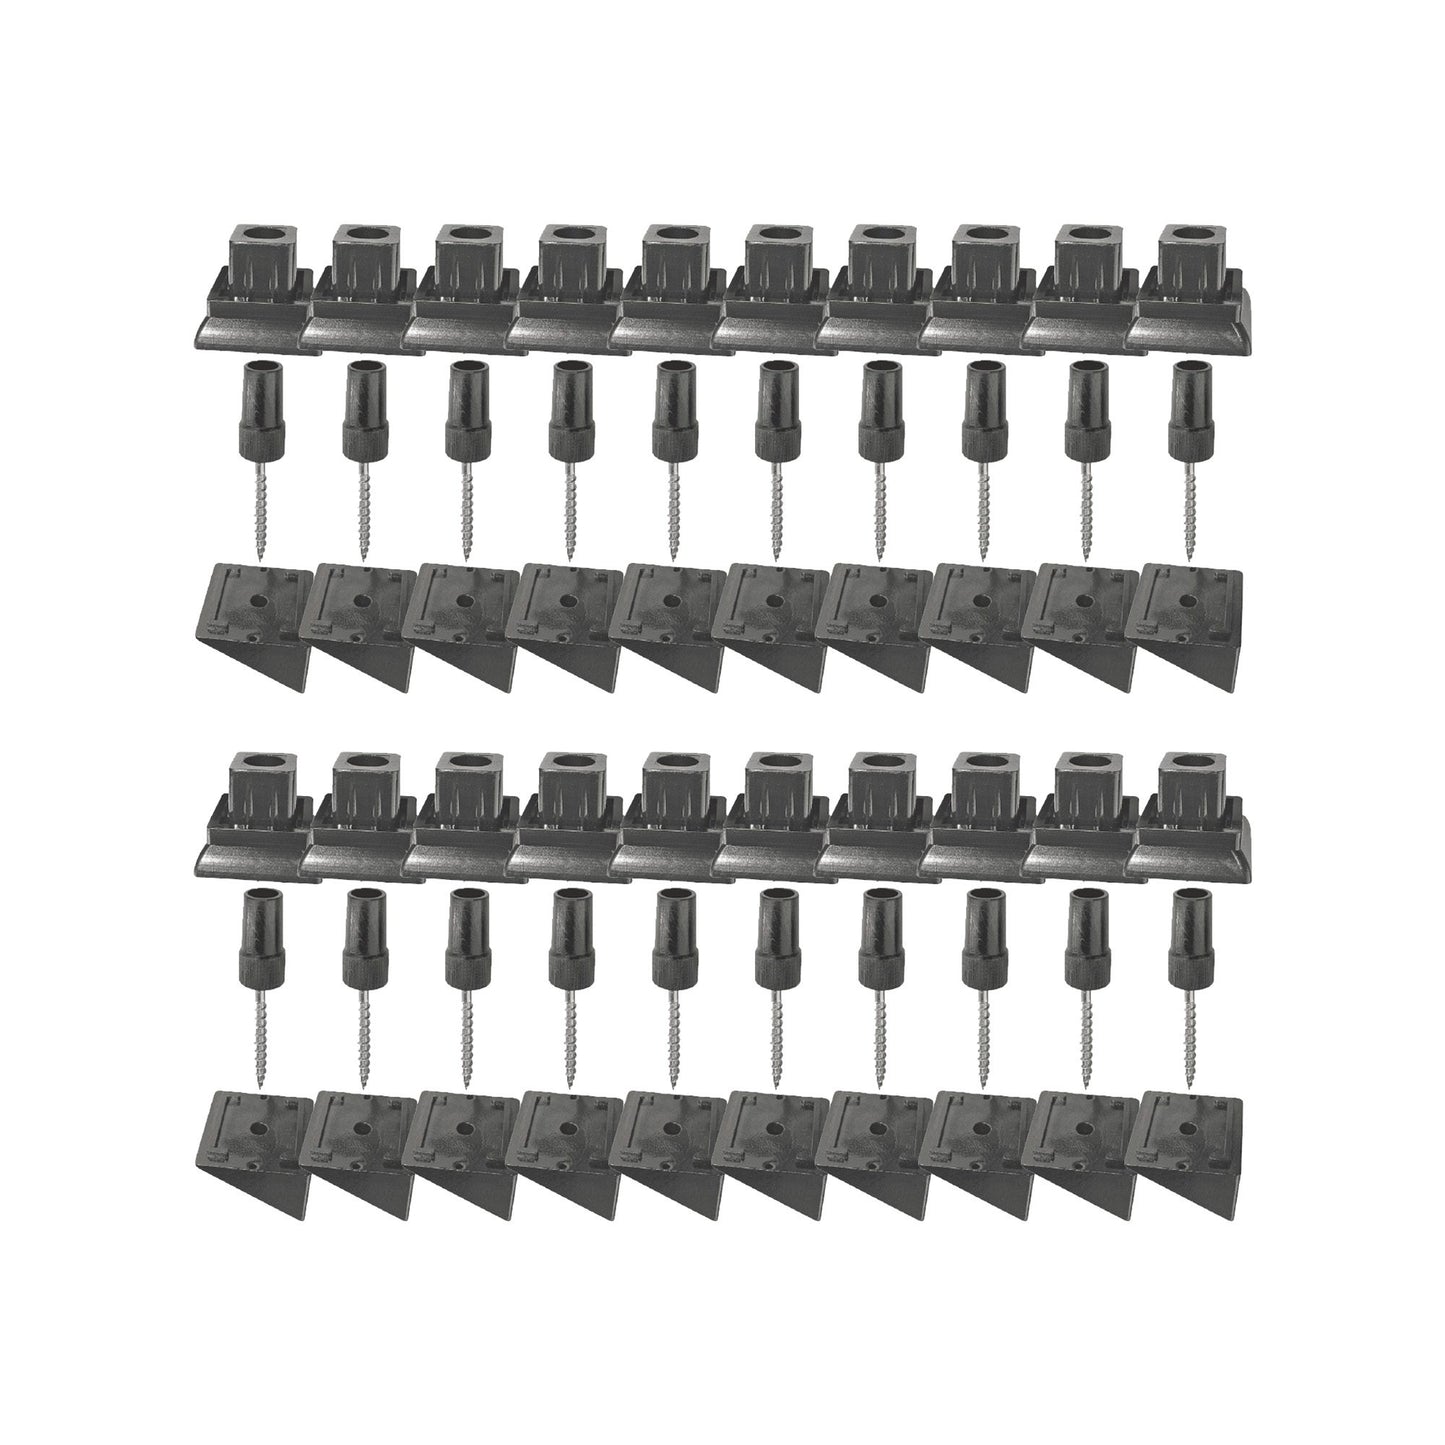 Surface Mount Stair Rail Connectors (20 pcs) for 3/4″ Square Balusters